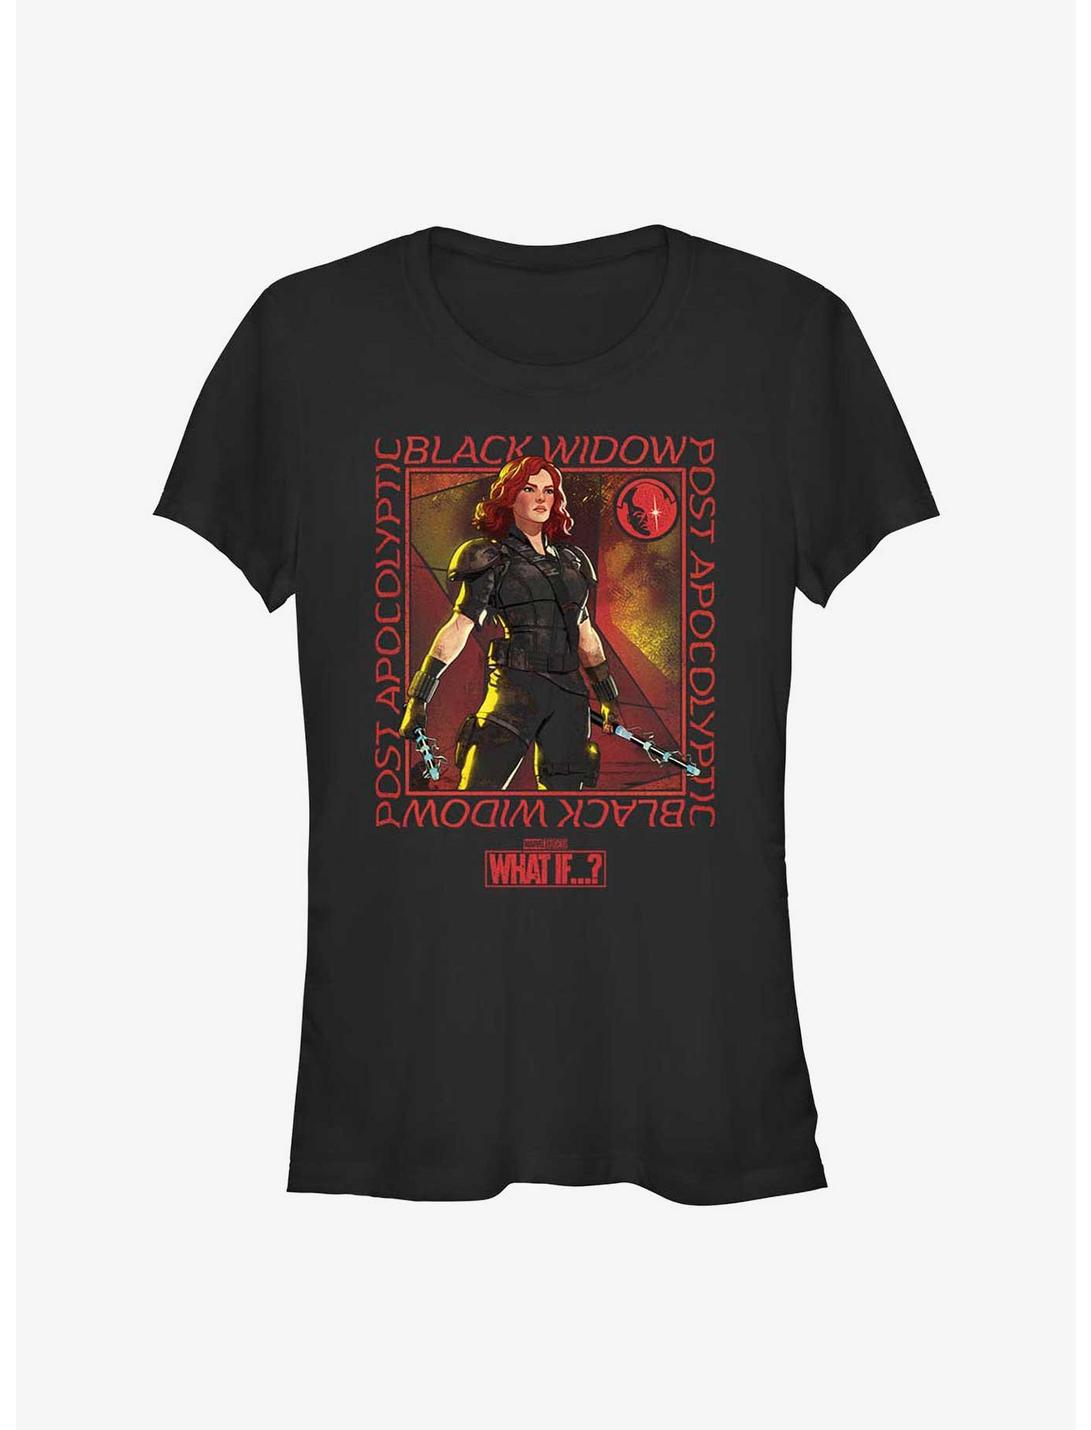 Marvel What If?? Post Apocalyptic Black Widow Girls T-Shirt, BLACK, hi-res